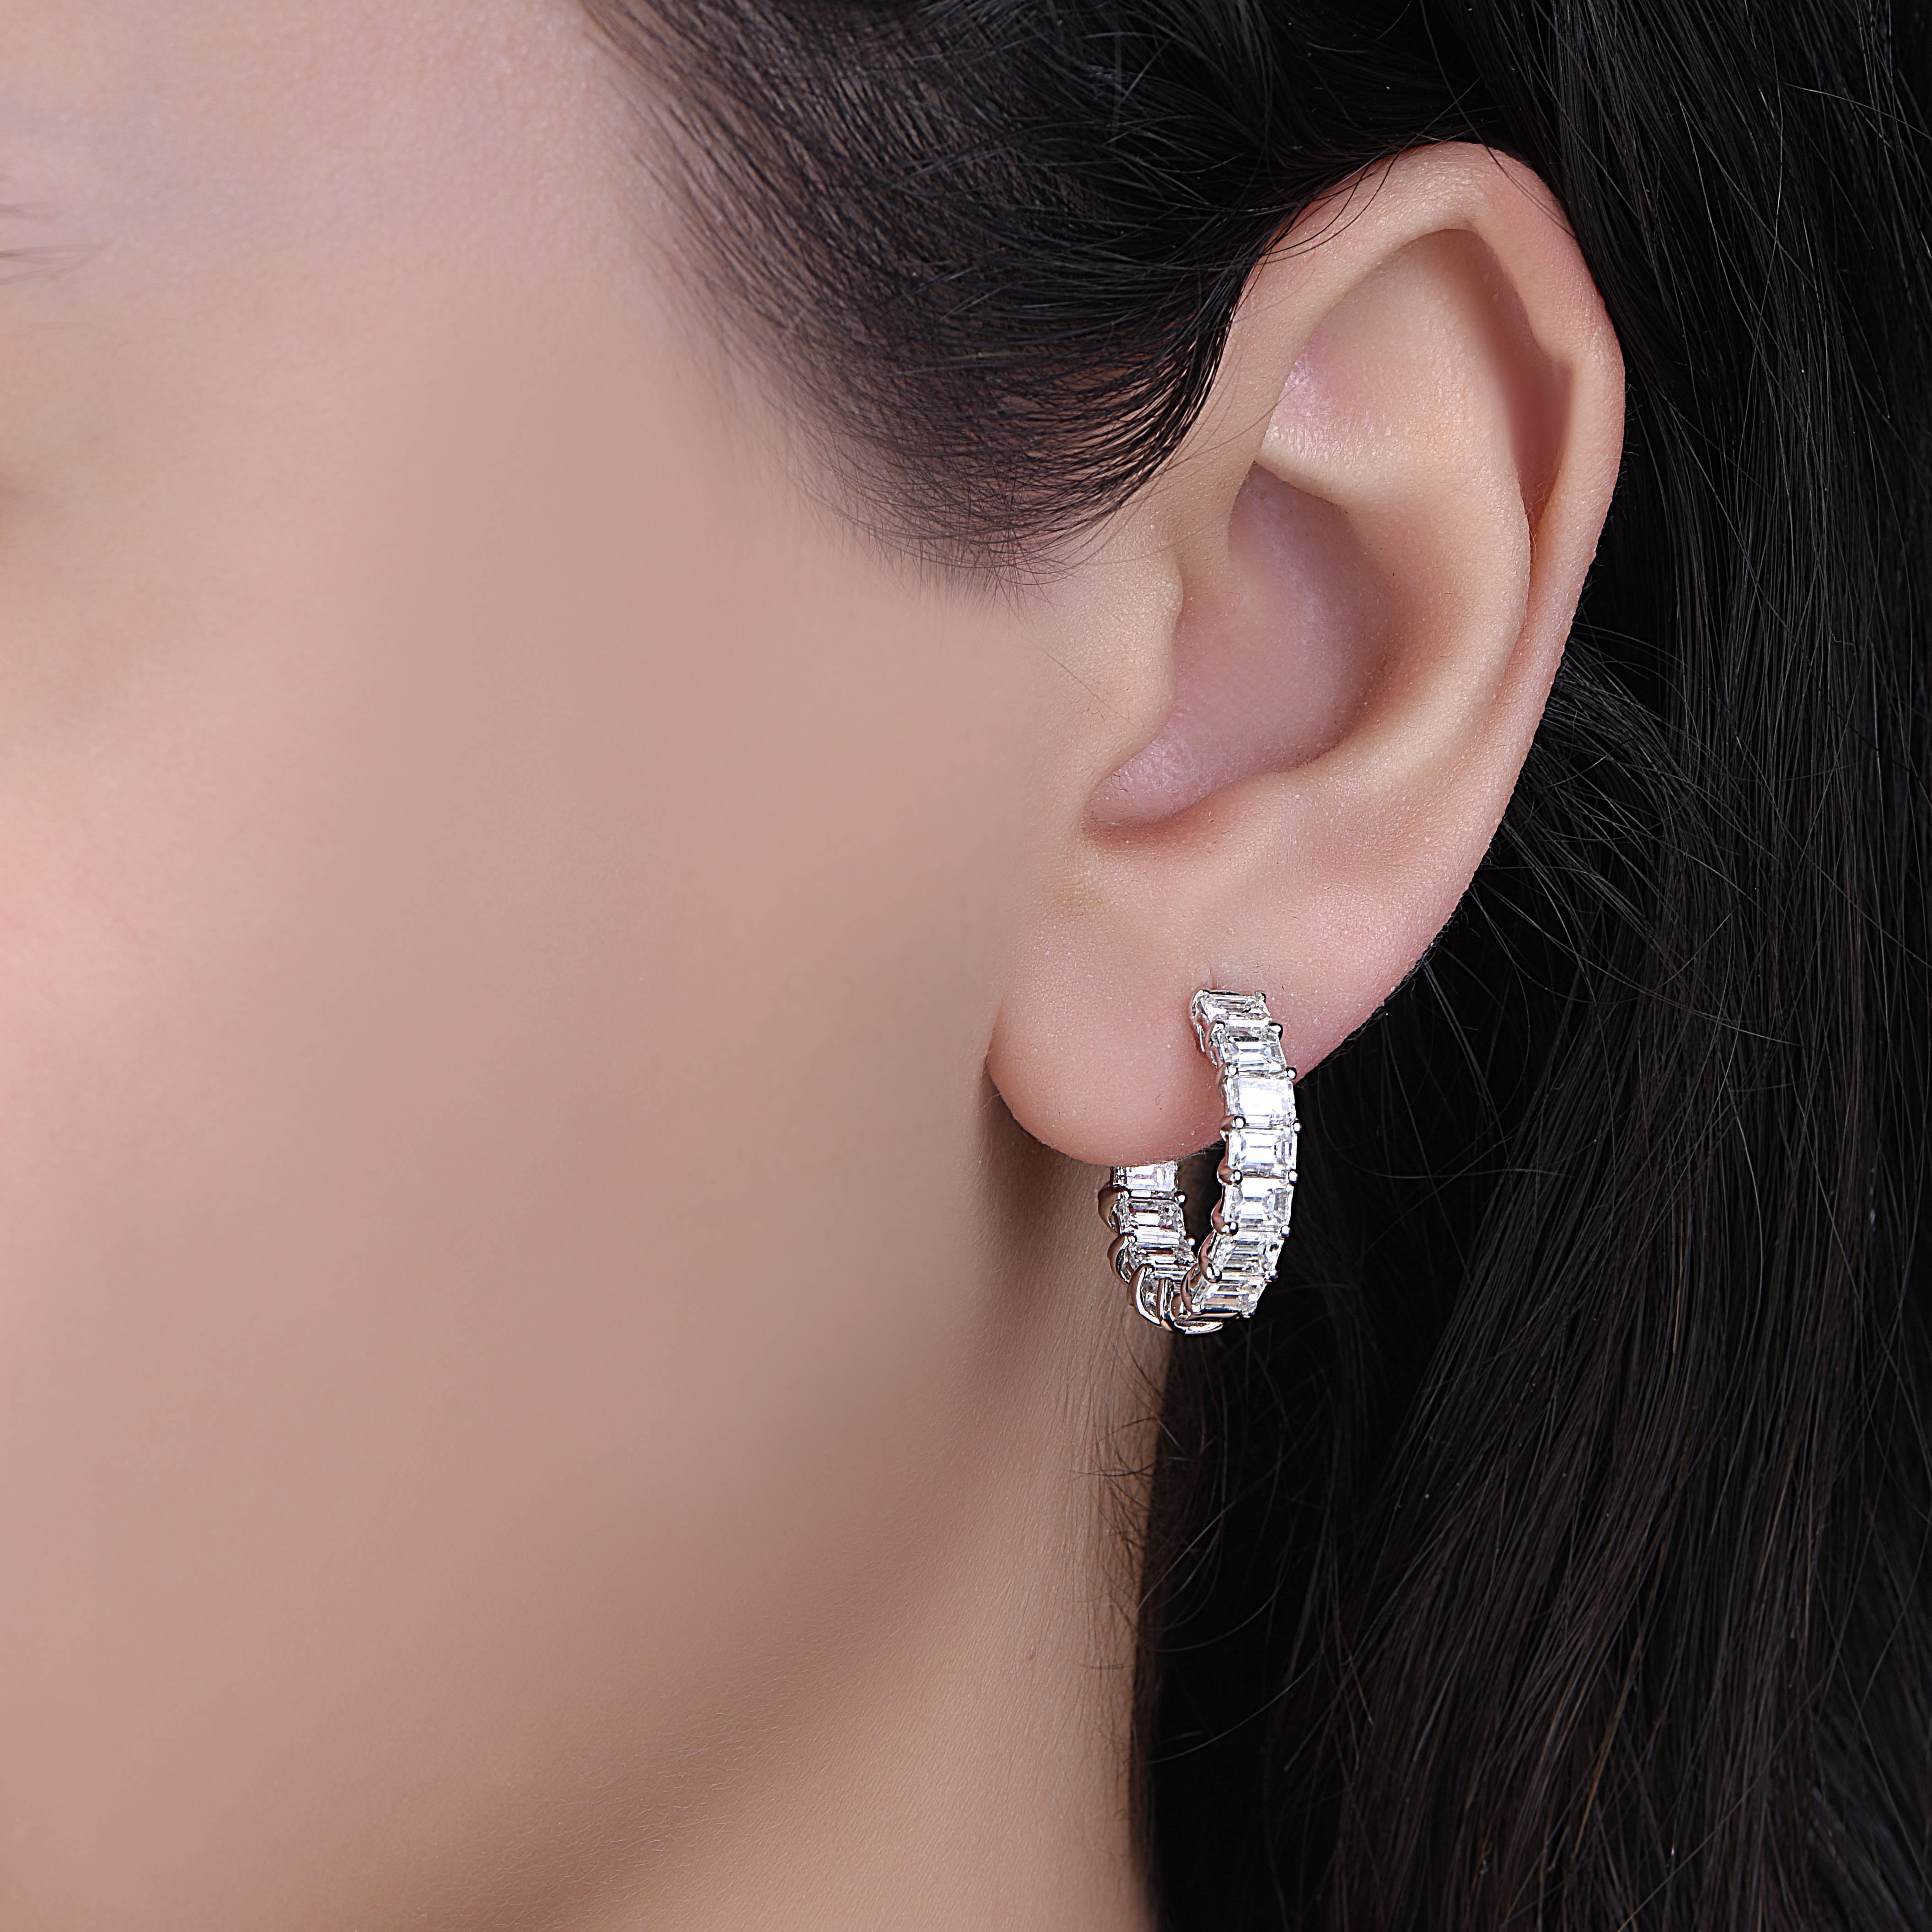 Great small diameter with large diamonds to wear everyday! About .75 inches top to bottom with our special push locking mechanism to ensure the hoops never fall off your ear! Measures 3.80mm wide and 18.30mm long
Approx total weight: 22 emerald cut